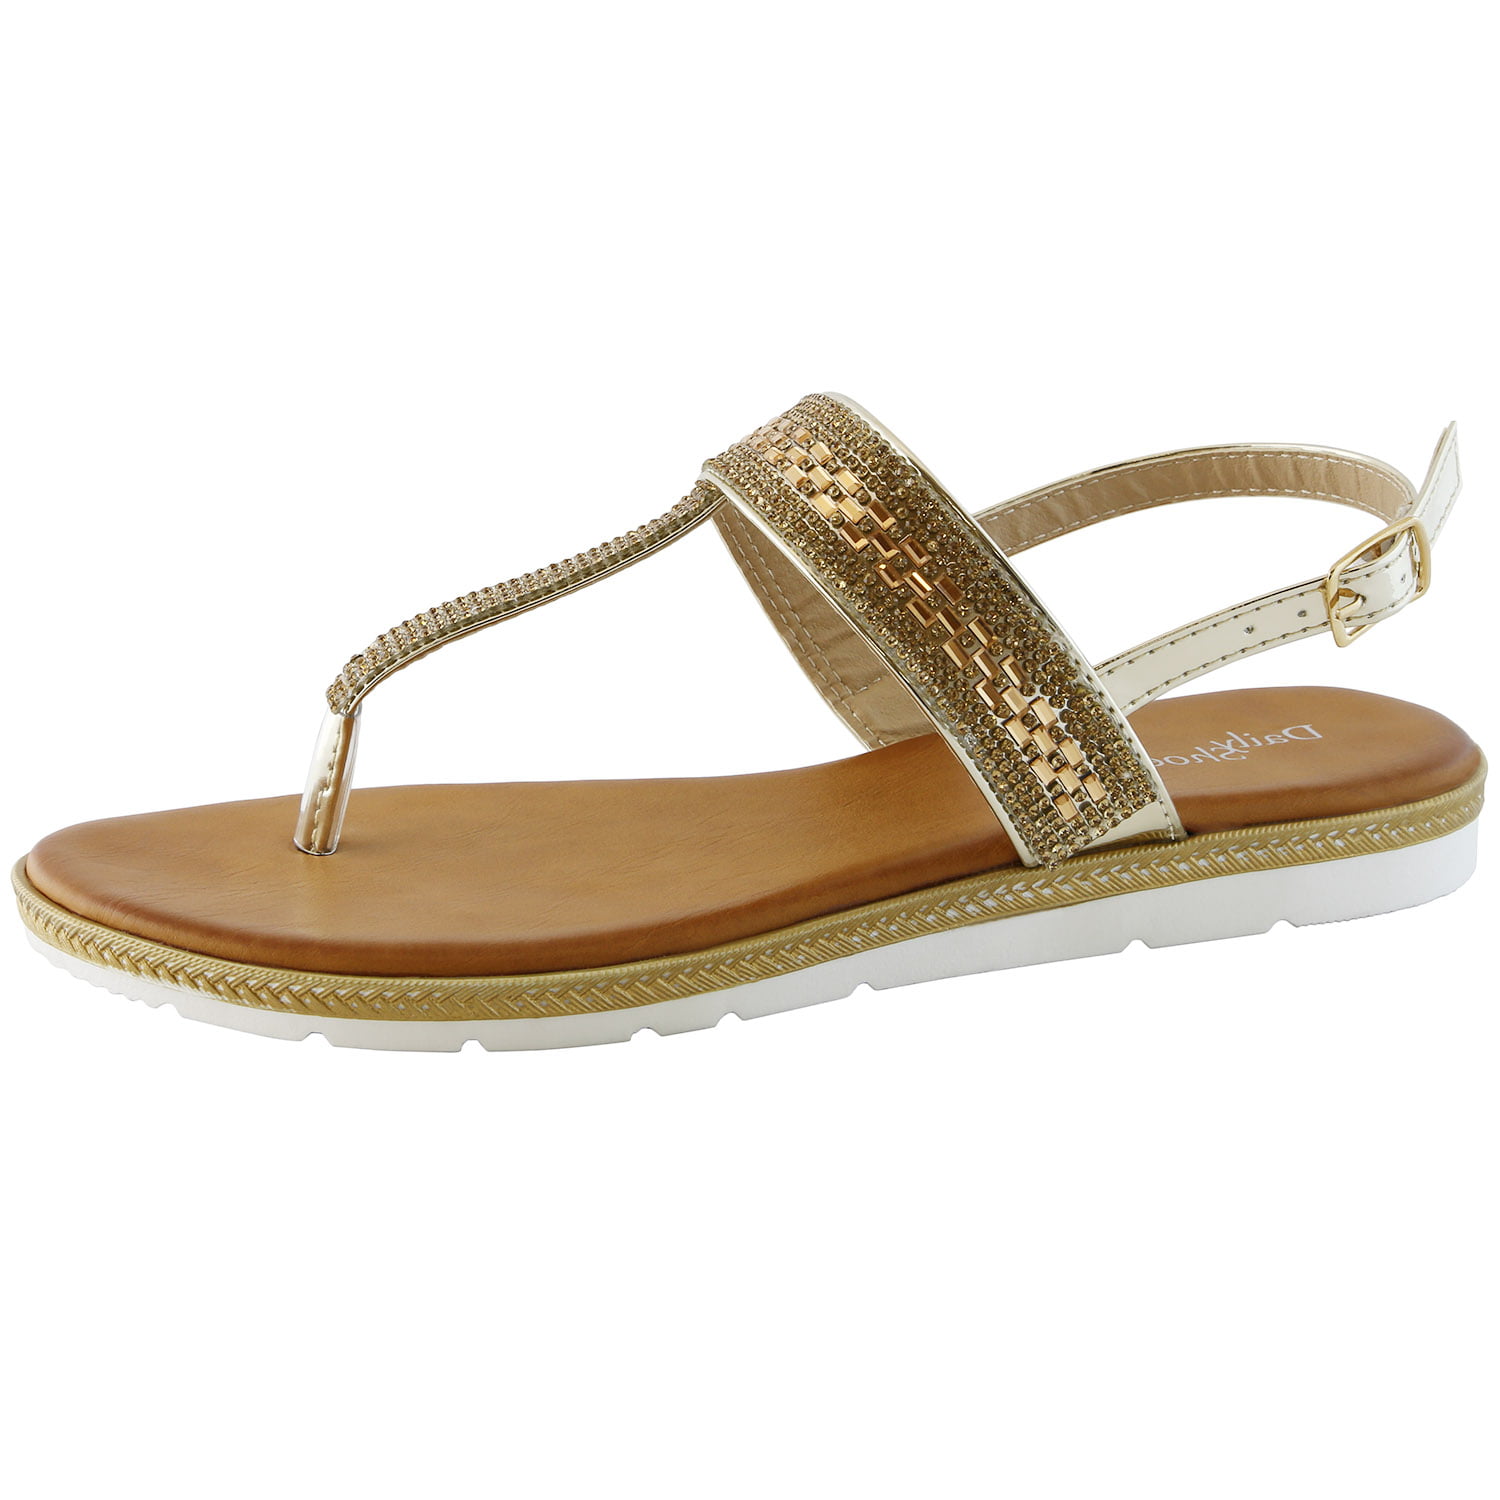 DailyShoes - DailyShoes Thong Sandals with Rhinestones Flat T-Strap ...